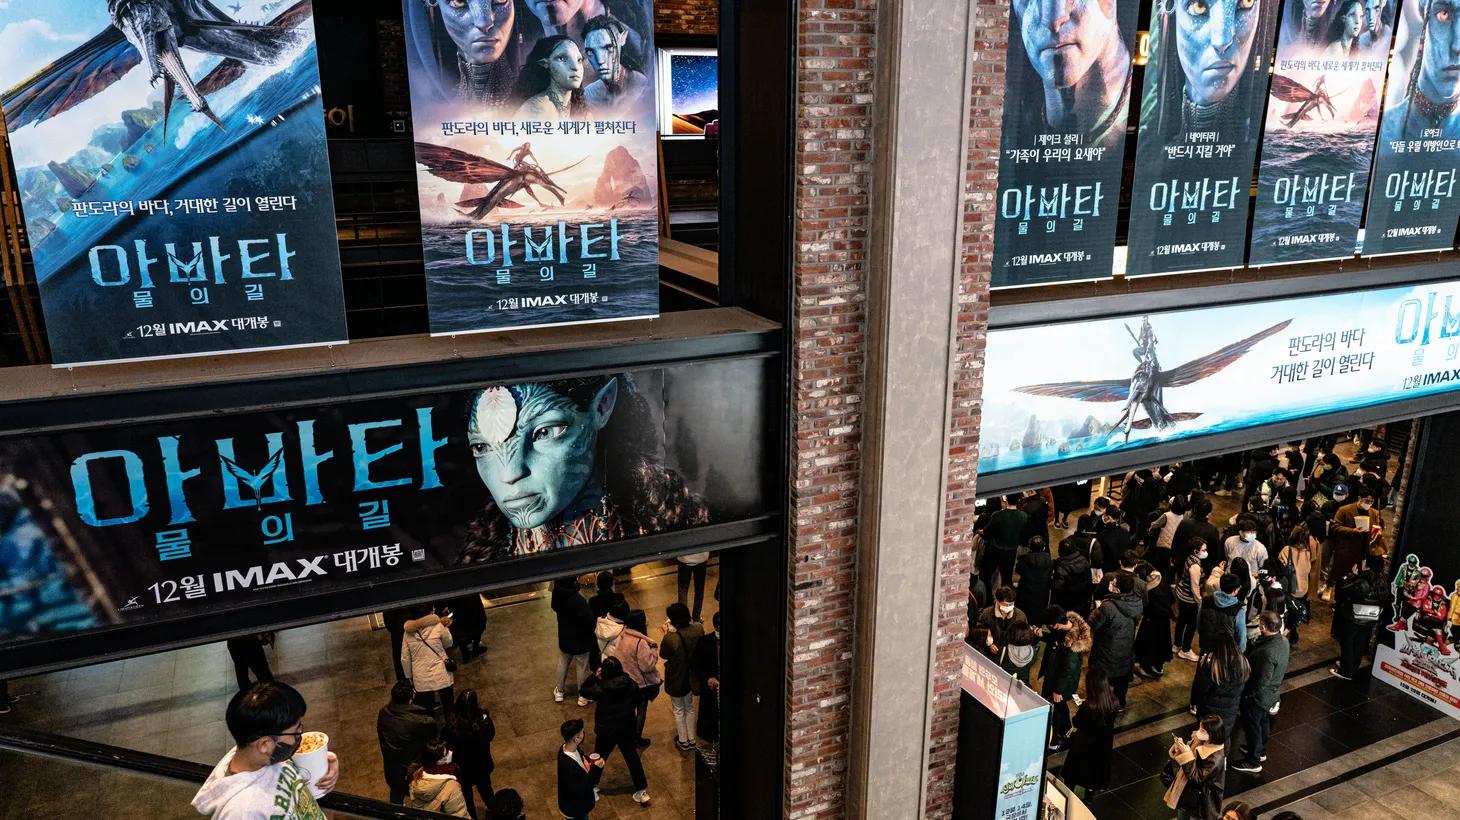 “‘Top Gun: Maverick’ and ‘Avatar: The Way of Water’ were the main bright spots that gave hope to people in the industry that movies are not dead, and that with the right incentive, audiences will turn out in droves,” says Kim Masters. “Avatar: The Way of Water” signboard displayed at a movie theater in Seoul, South Korea on December 17, 2022.